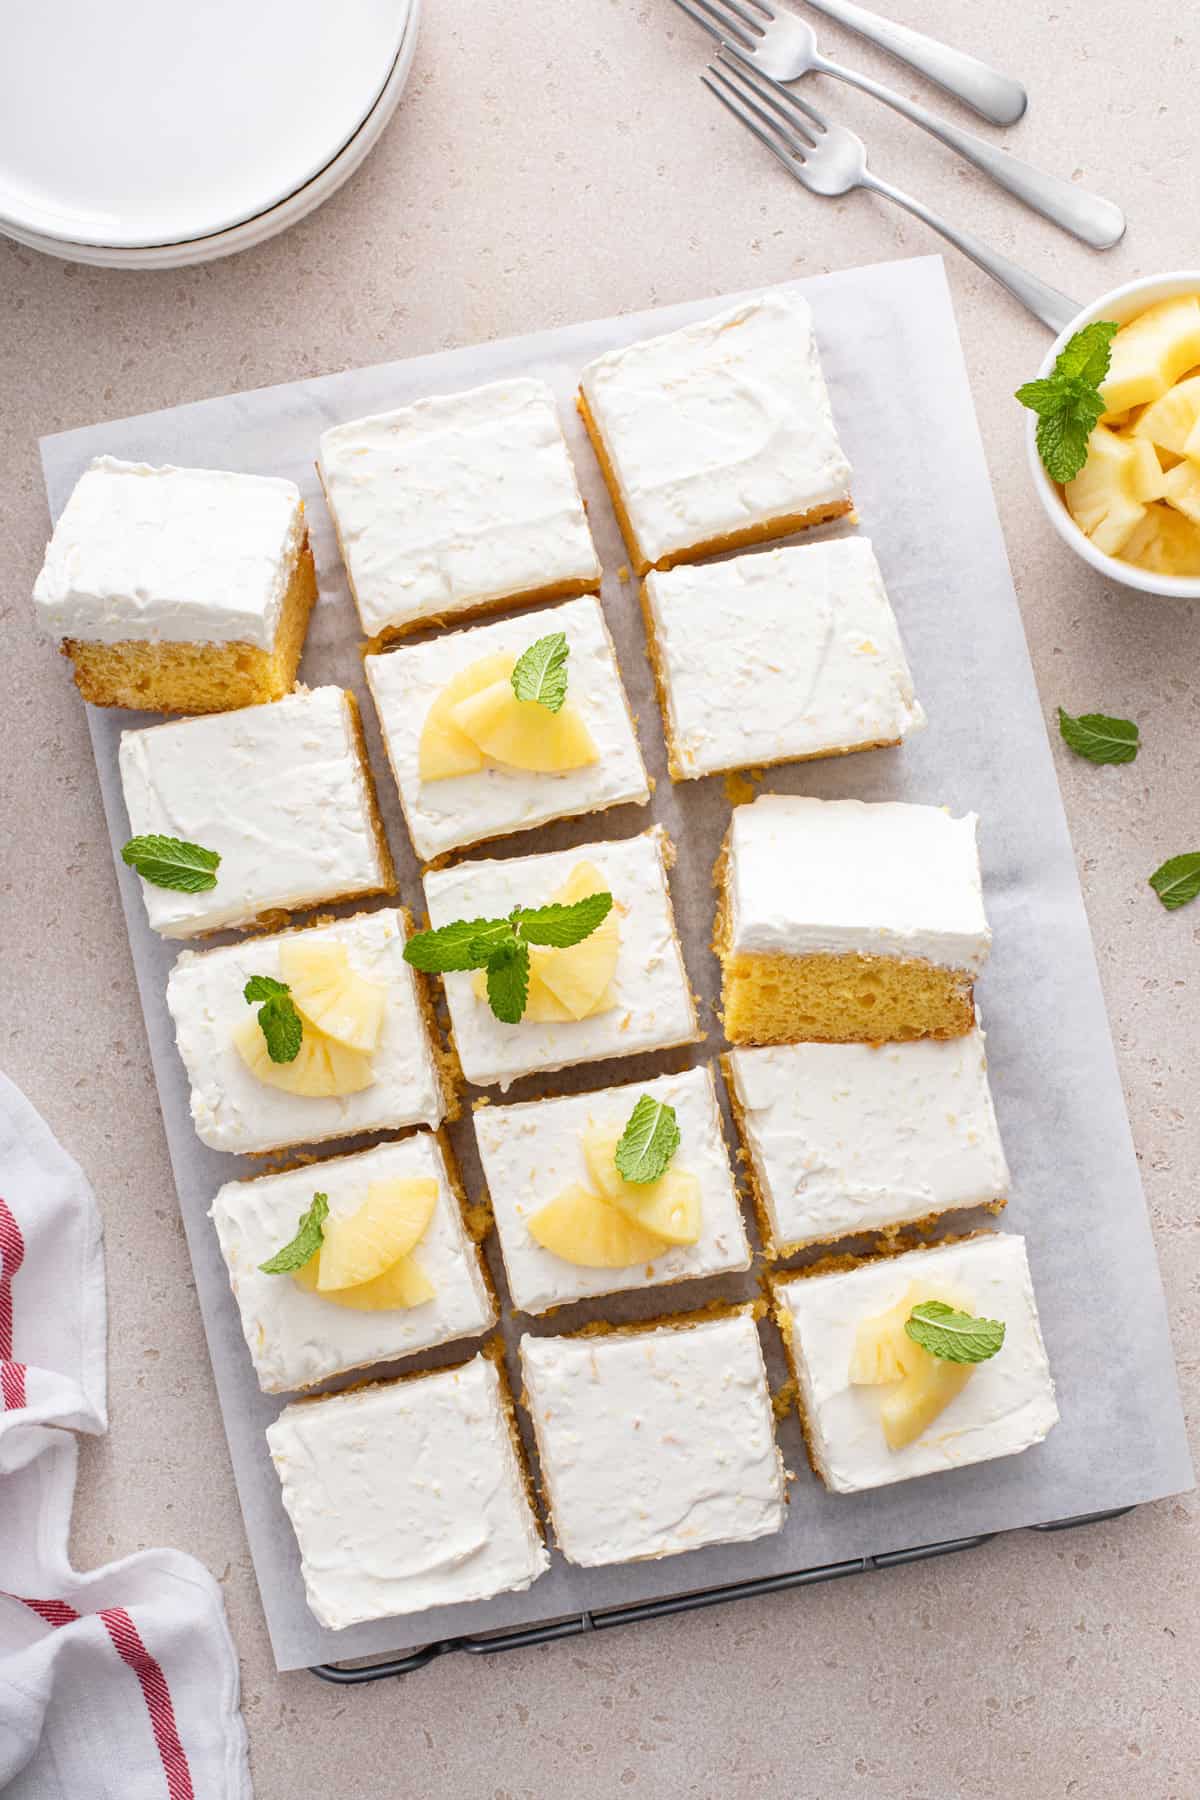 Overhead view of frosted easy pineapple cake cut into slices.